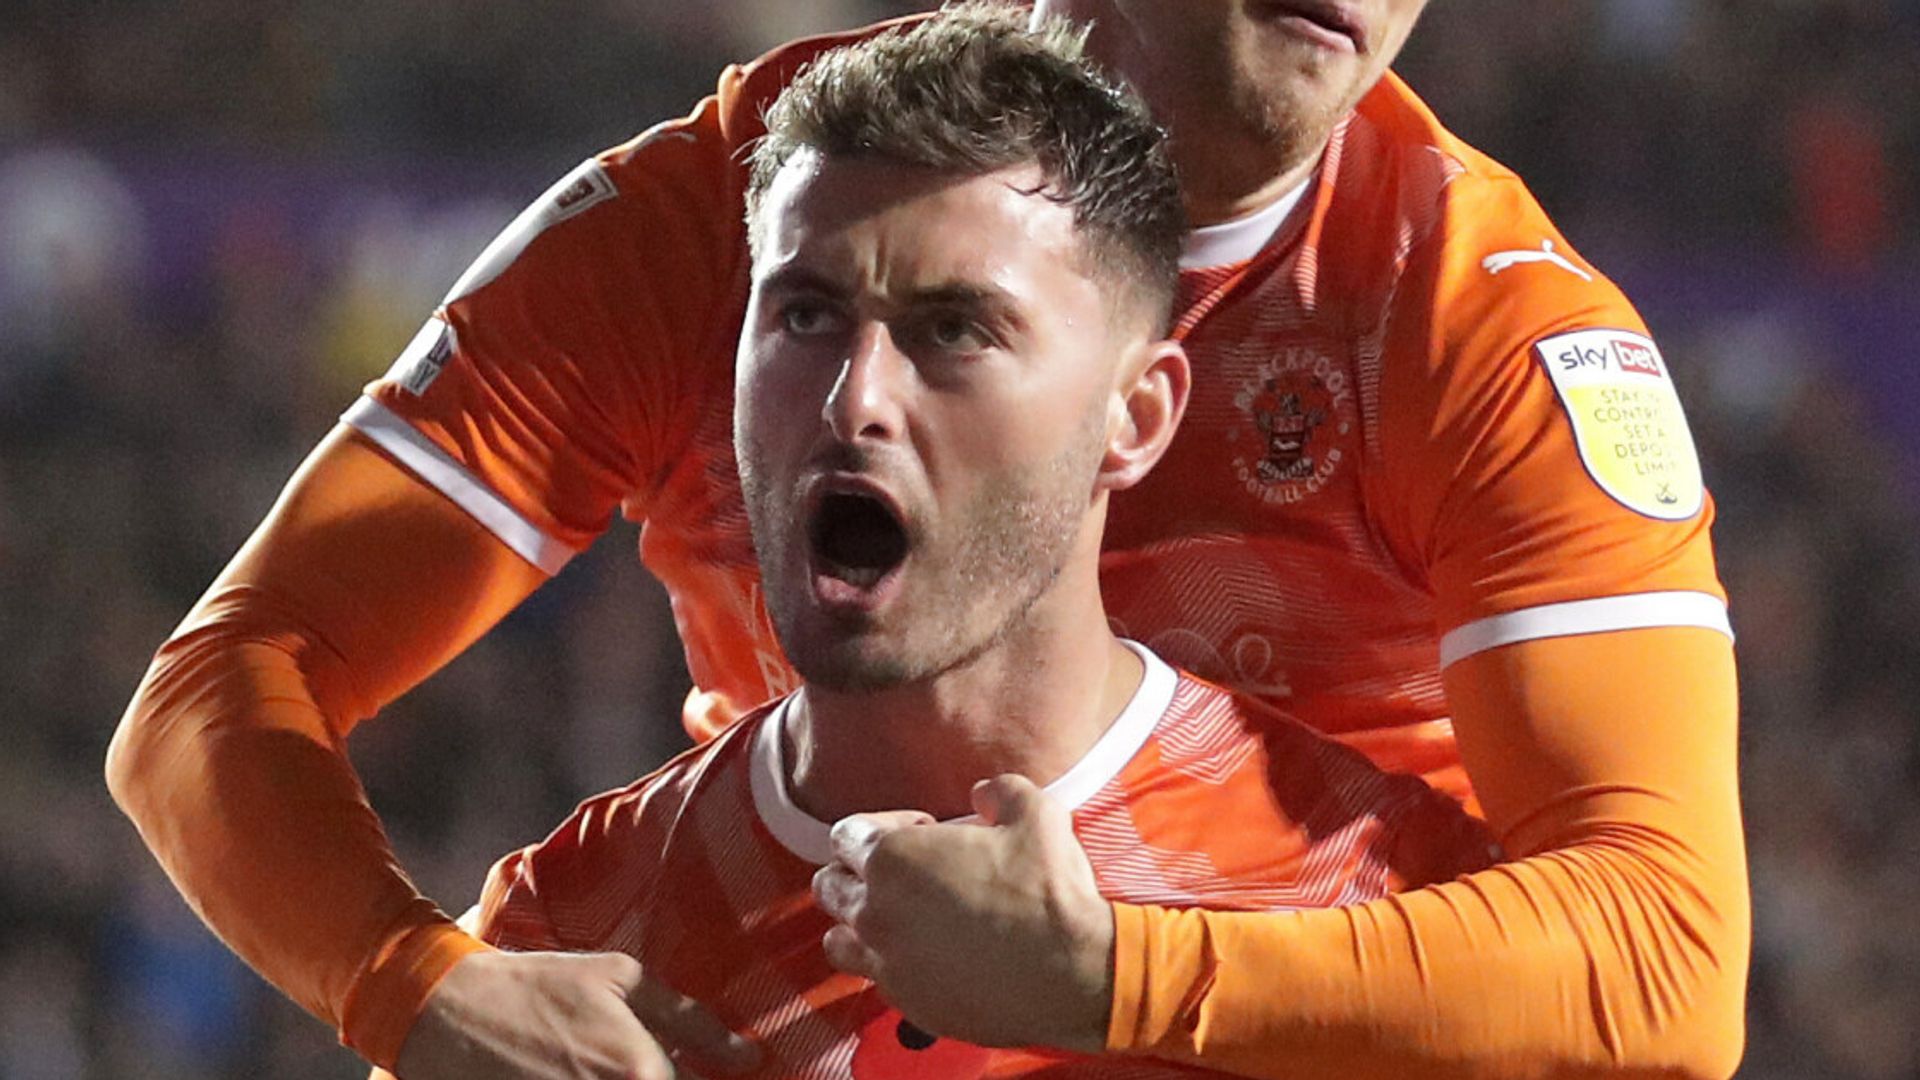 Blackpool goal controversially ruled out in QPR draw